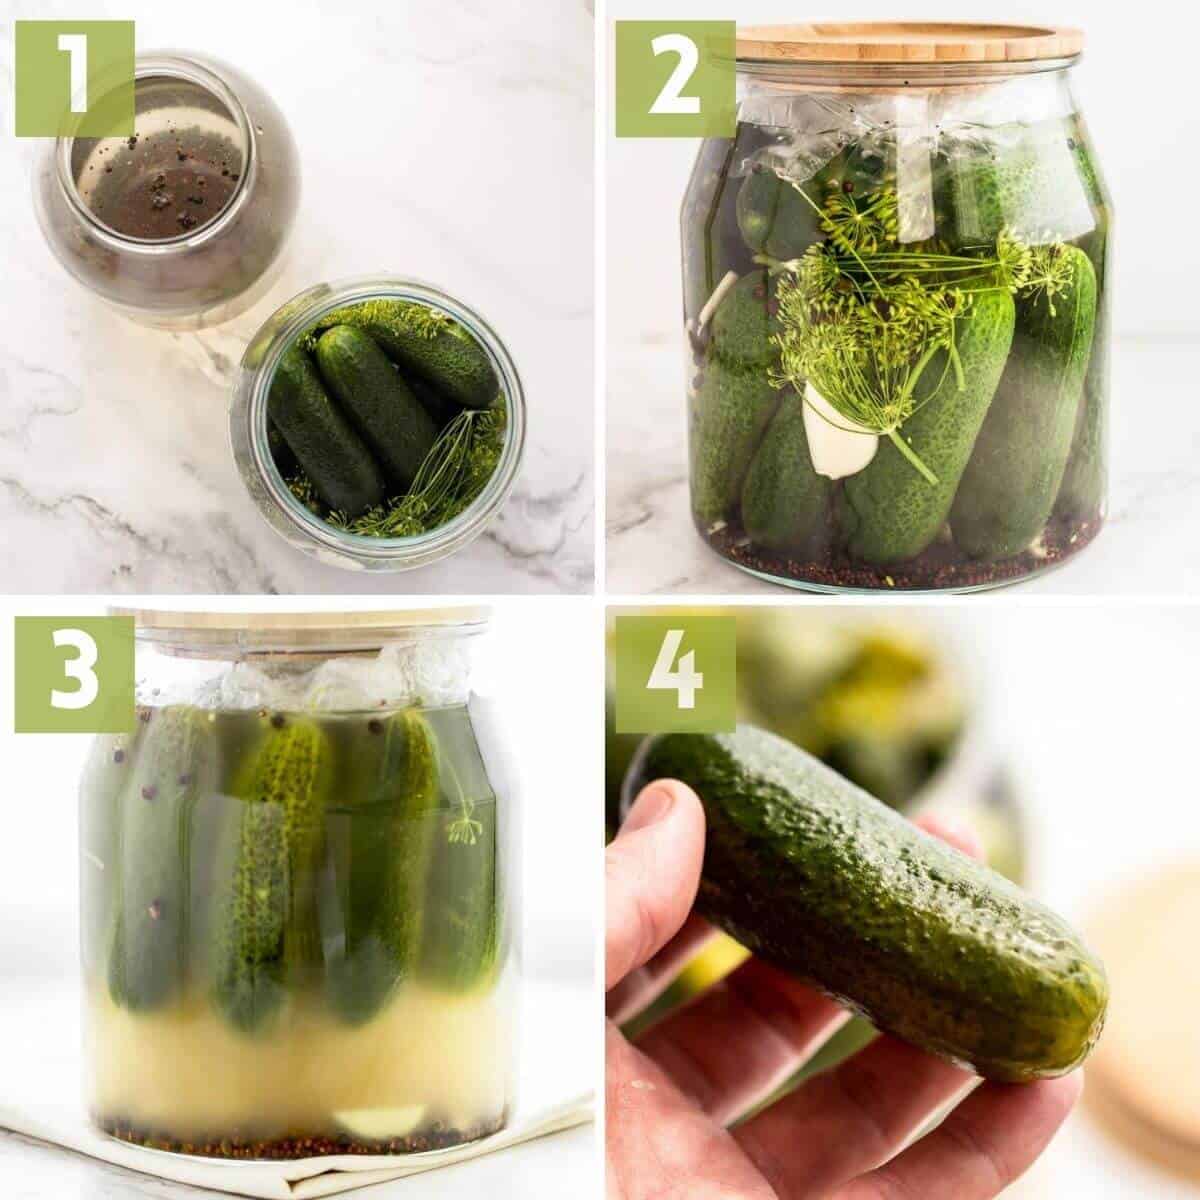 Picture steps of how to make fermented cucumbers.